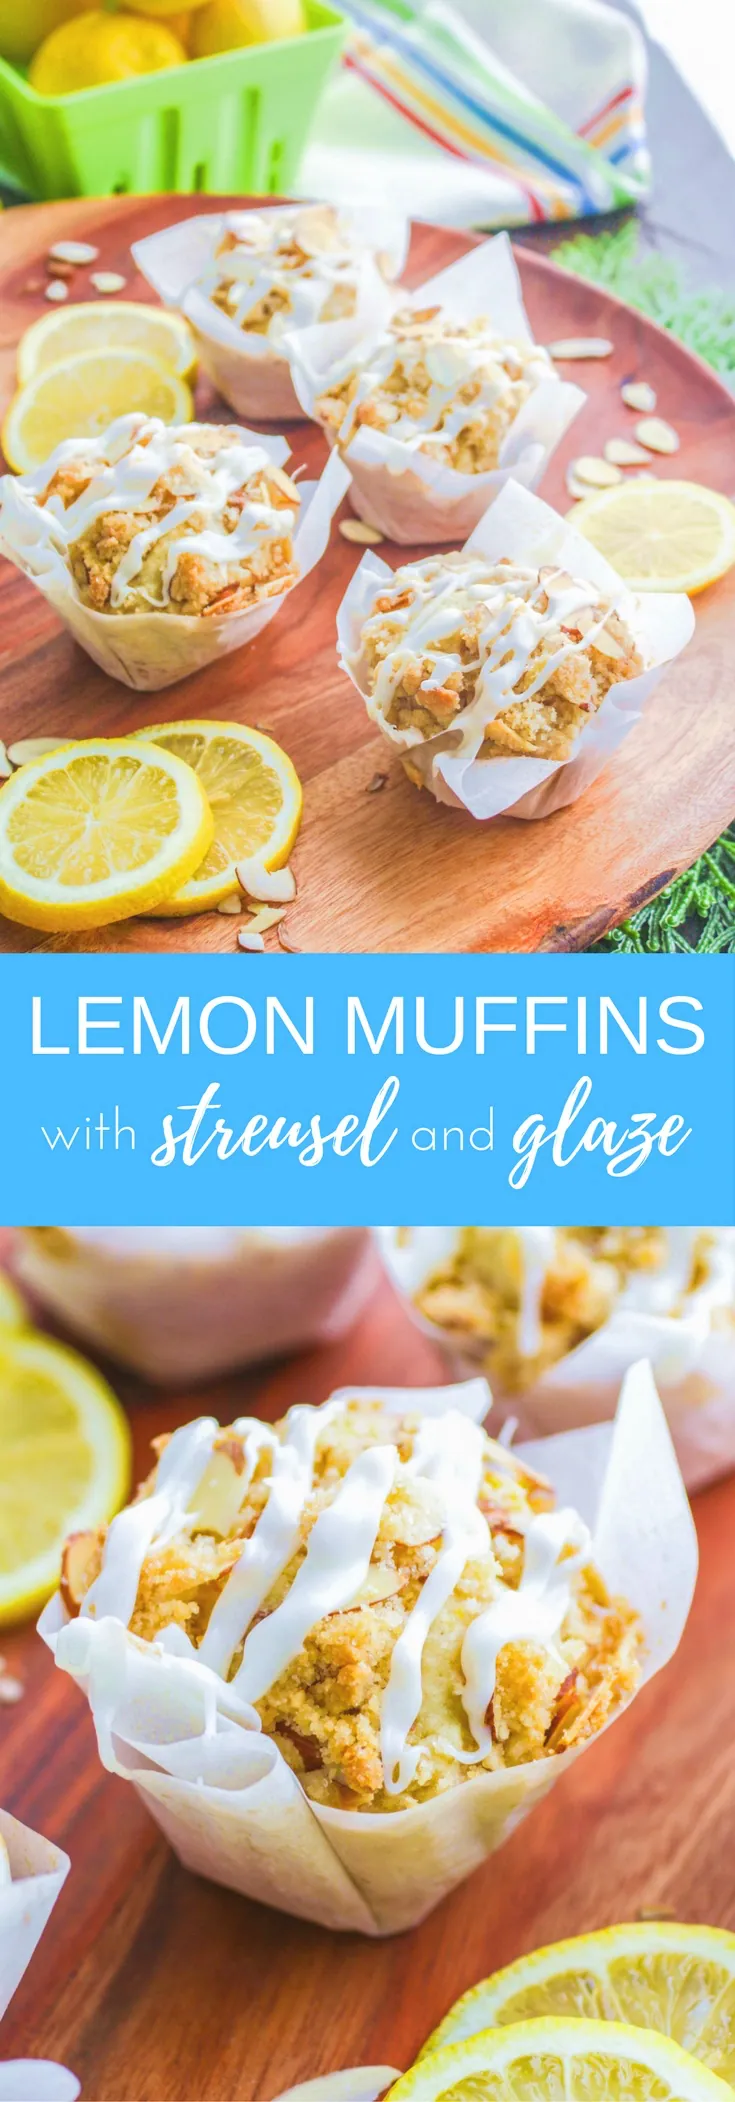 Lemon Muffins with Almond Streusel and Glaze are a lovey start to your day. Lemon muffins are bright and delicious!